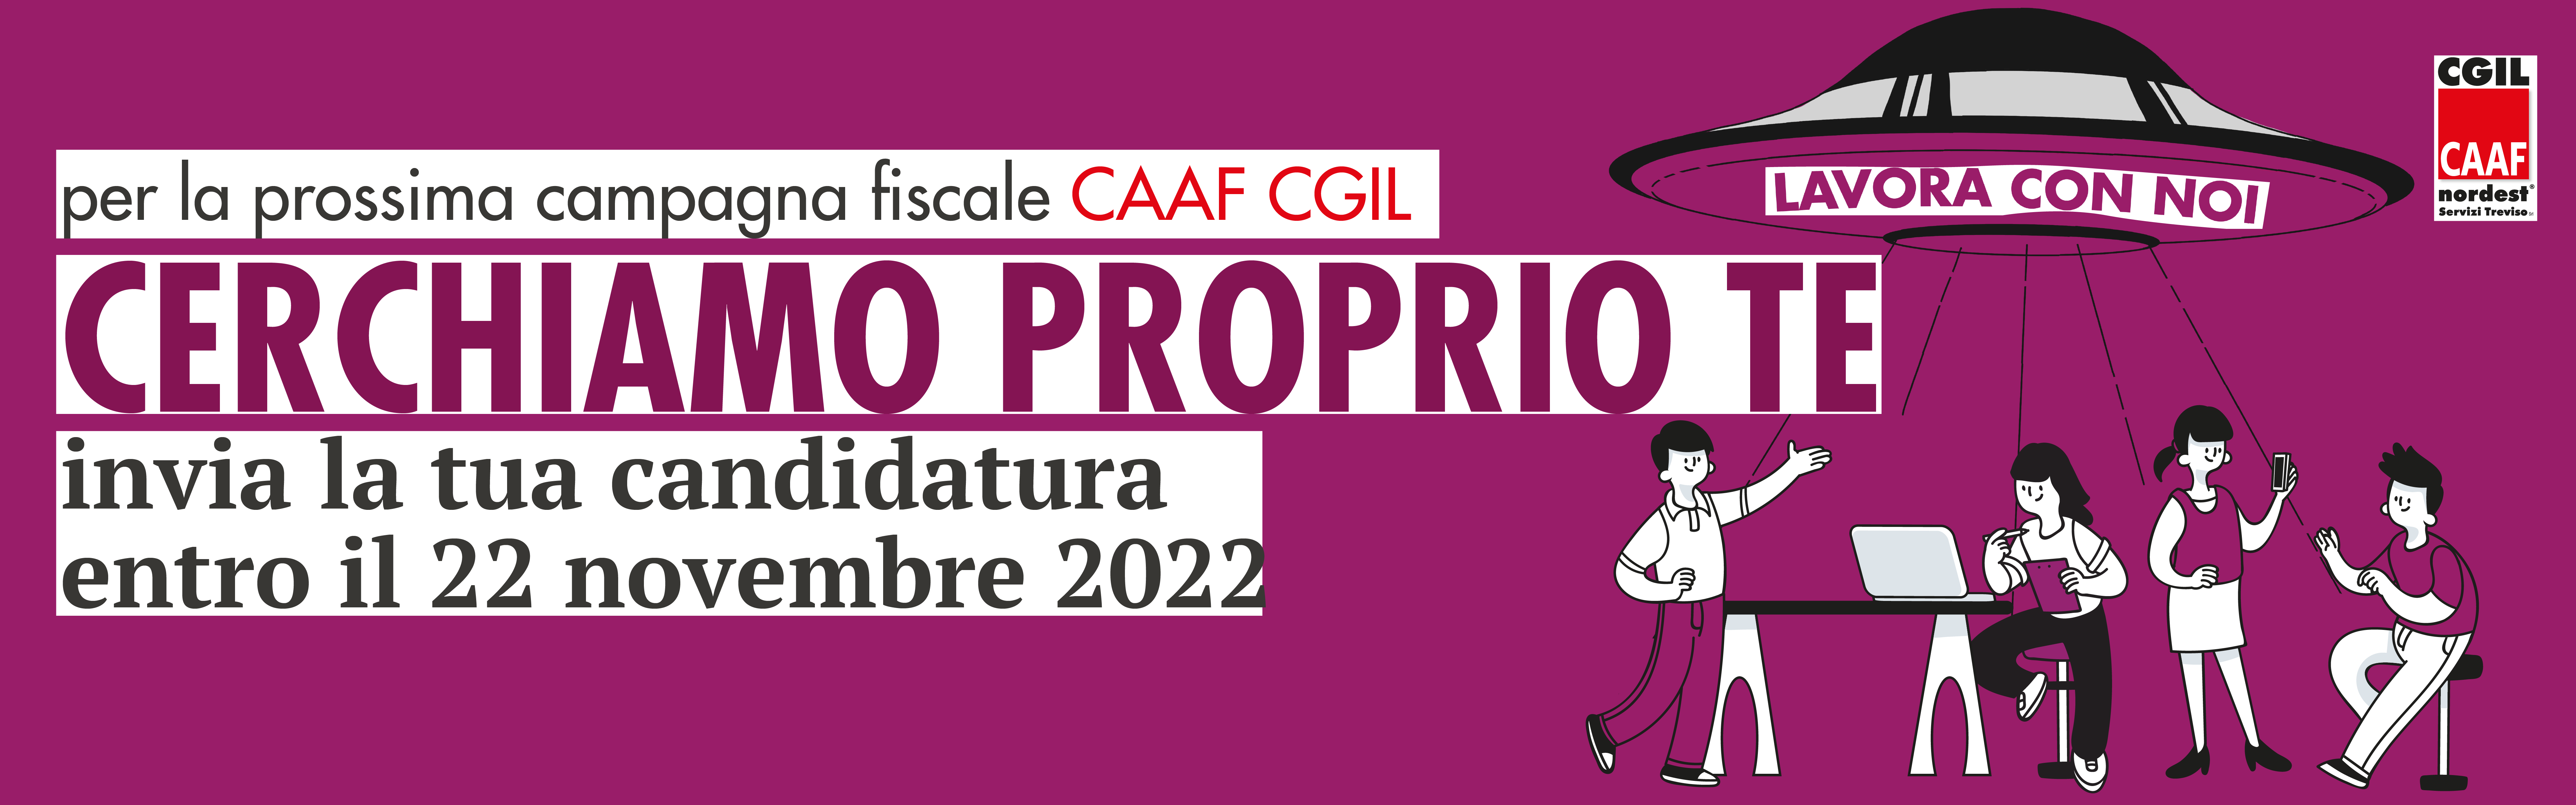 CAAF CGIL TV-RicercaPersonale2023